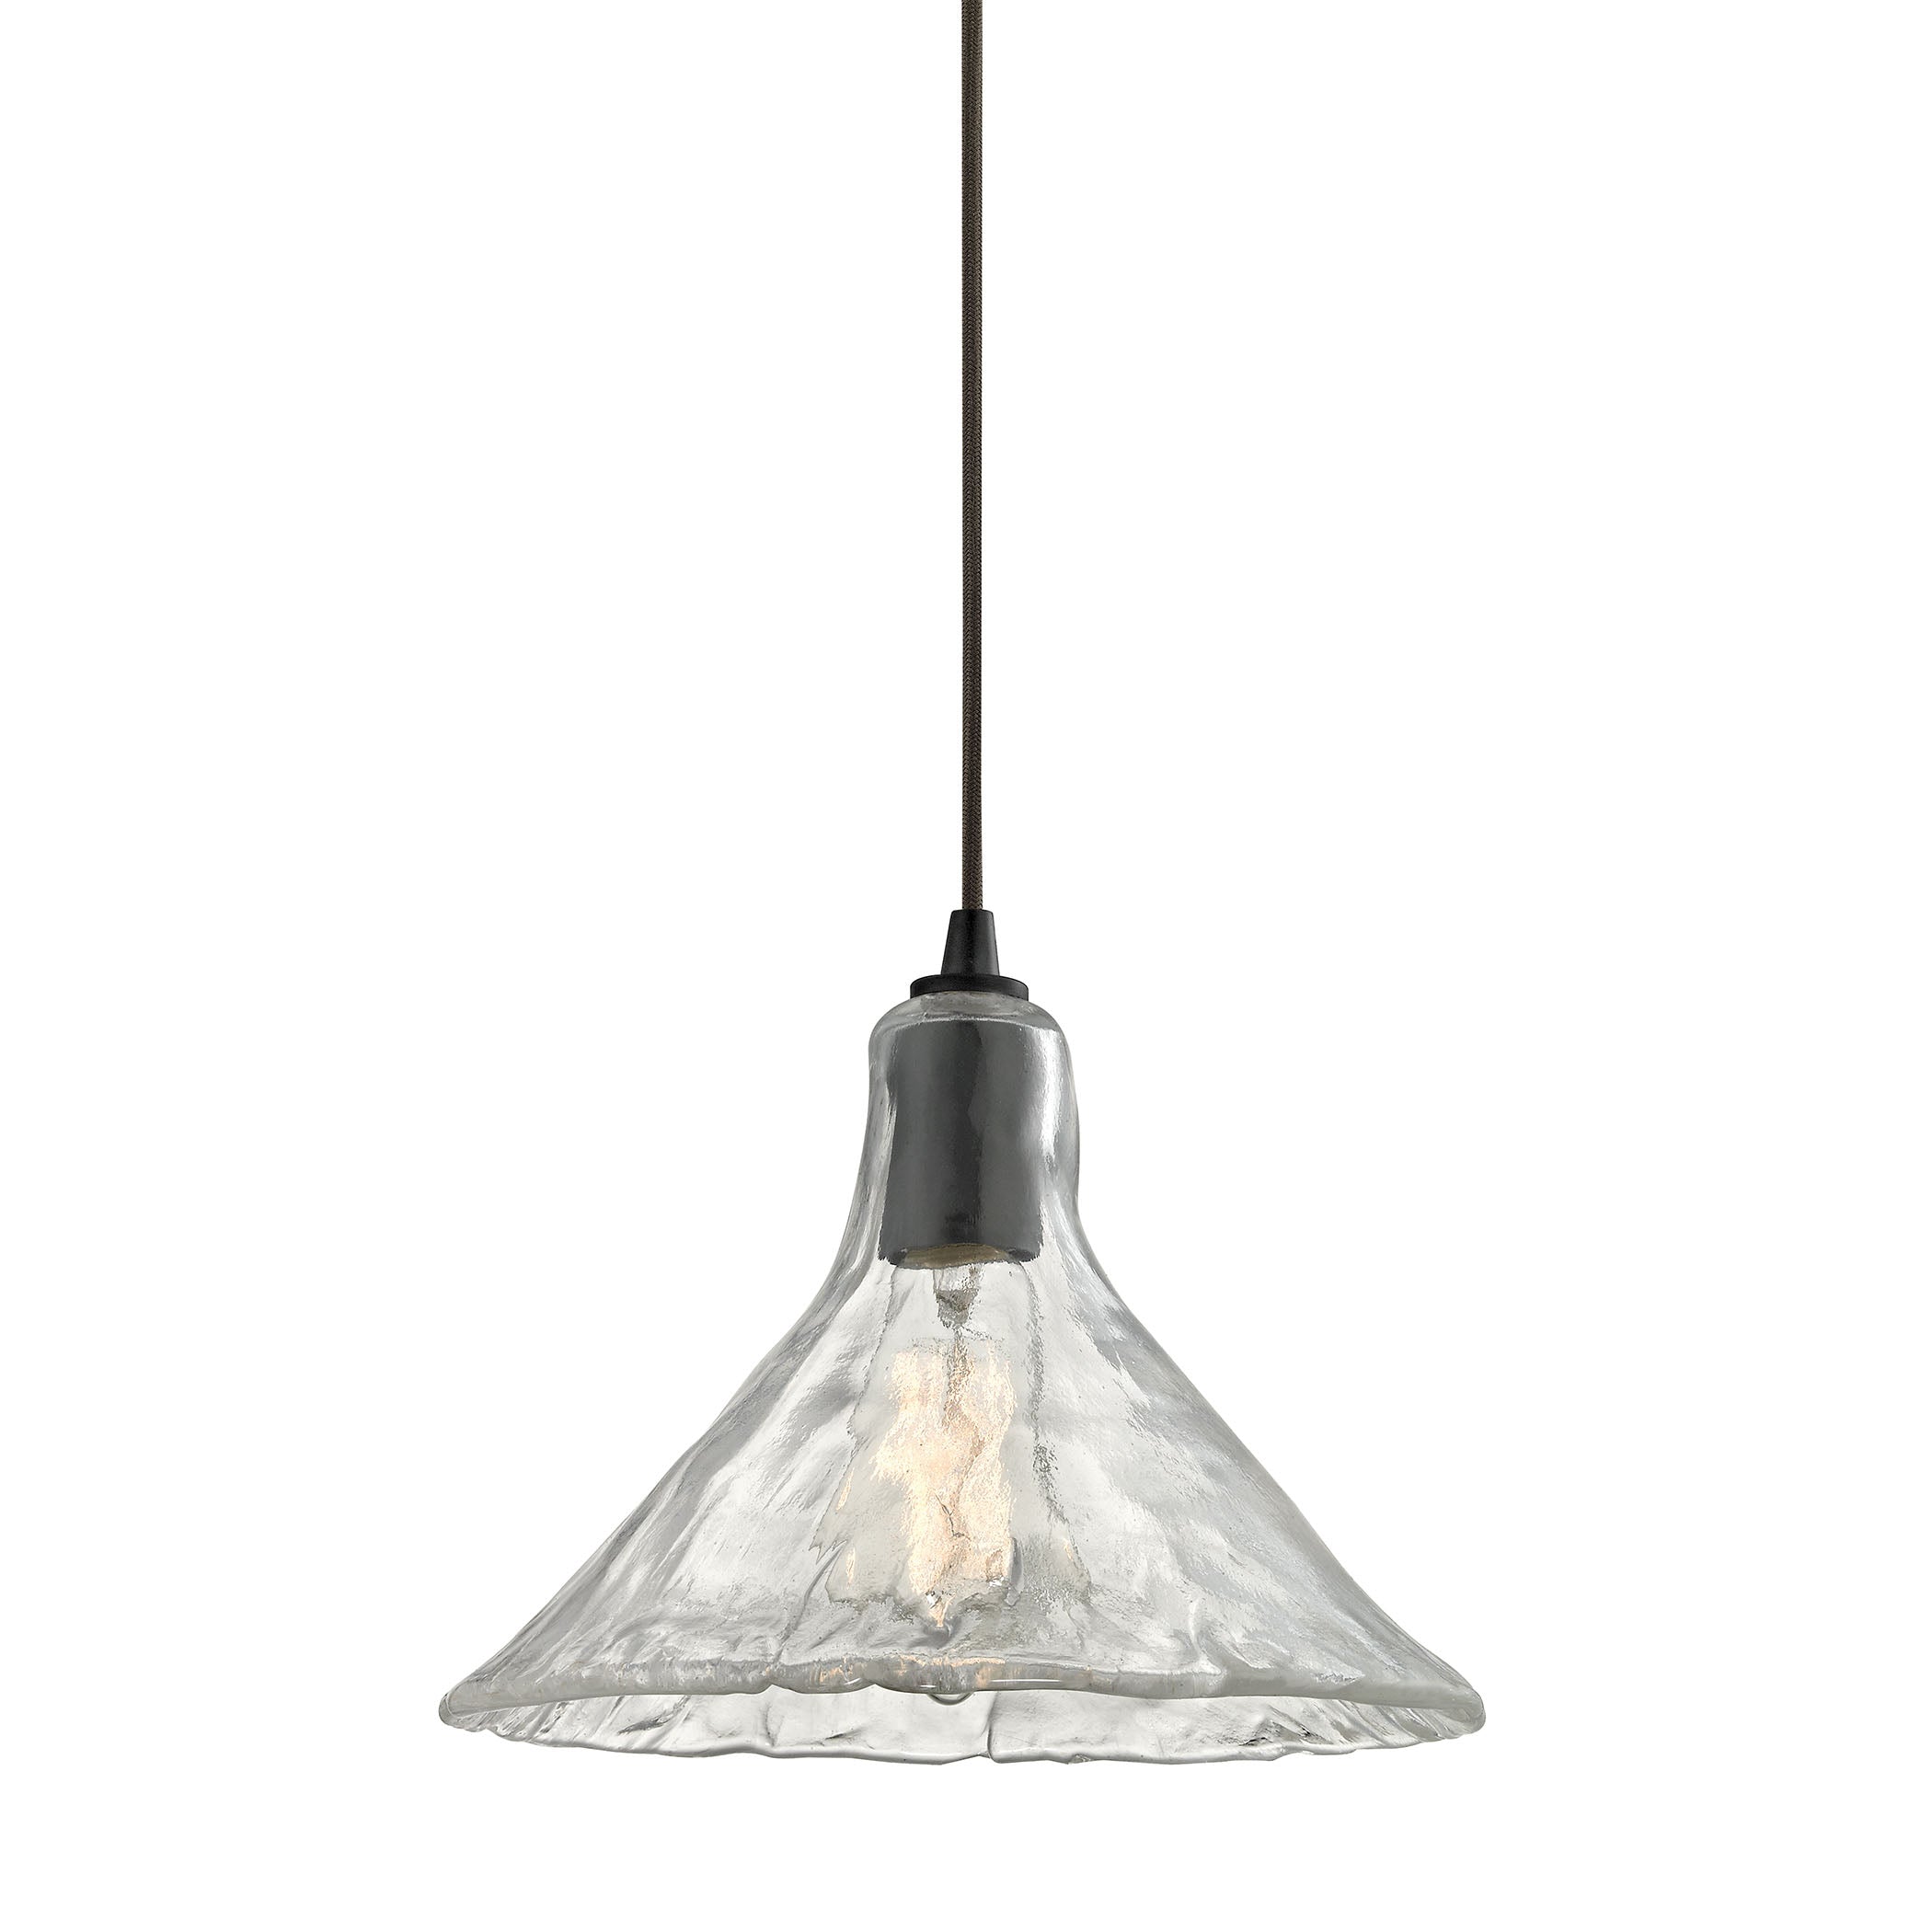 ELK Lighting 10435/1 Hand Formed Glass 1-Light Mini Pendant in Oiled Bronze with Clear Hand-formed Glass